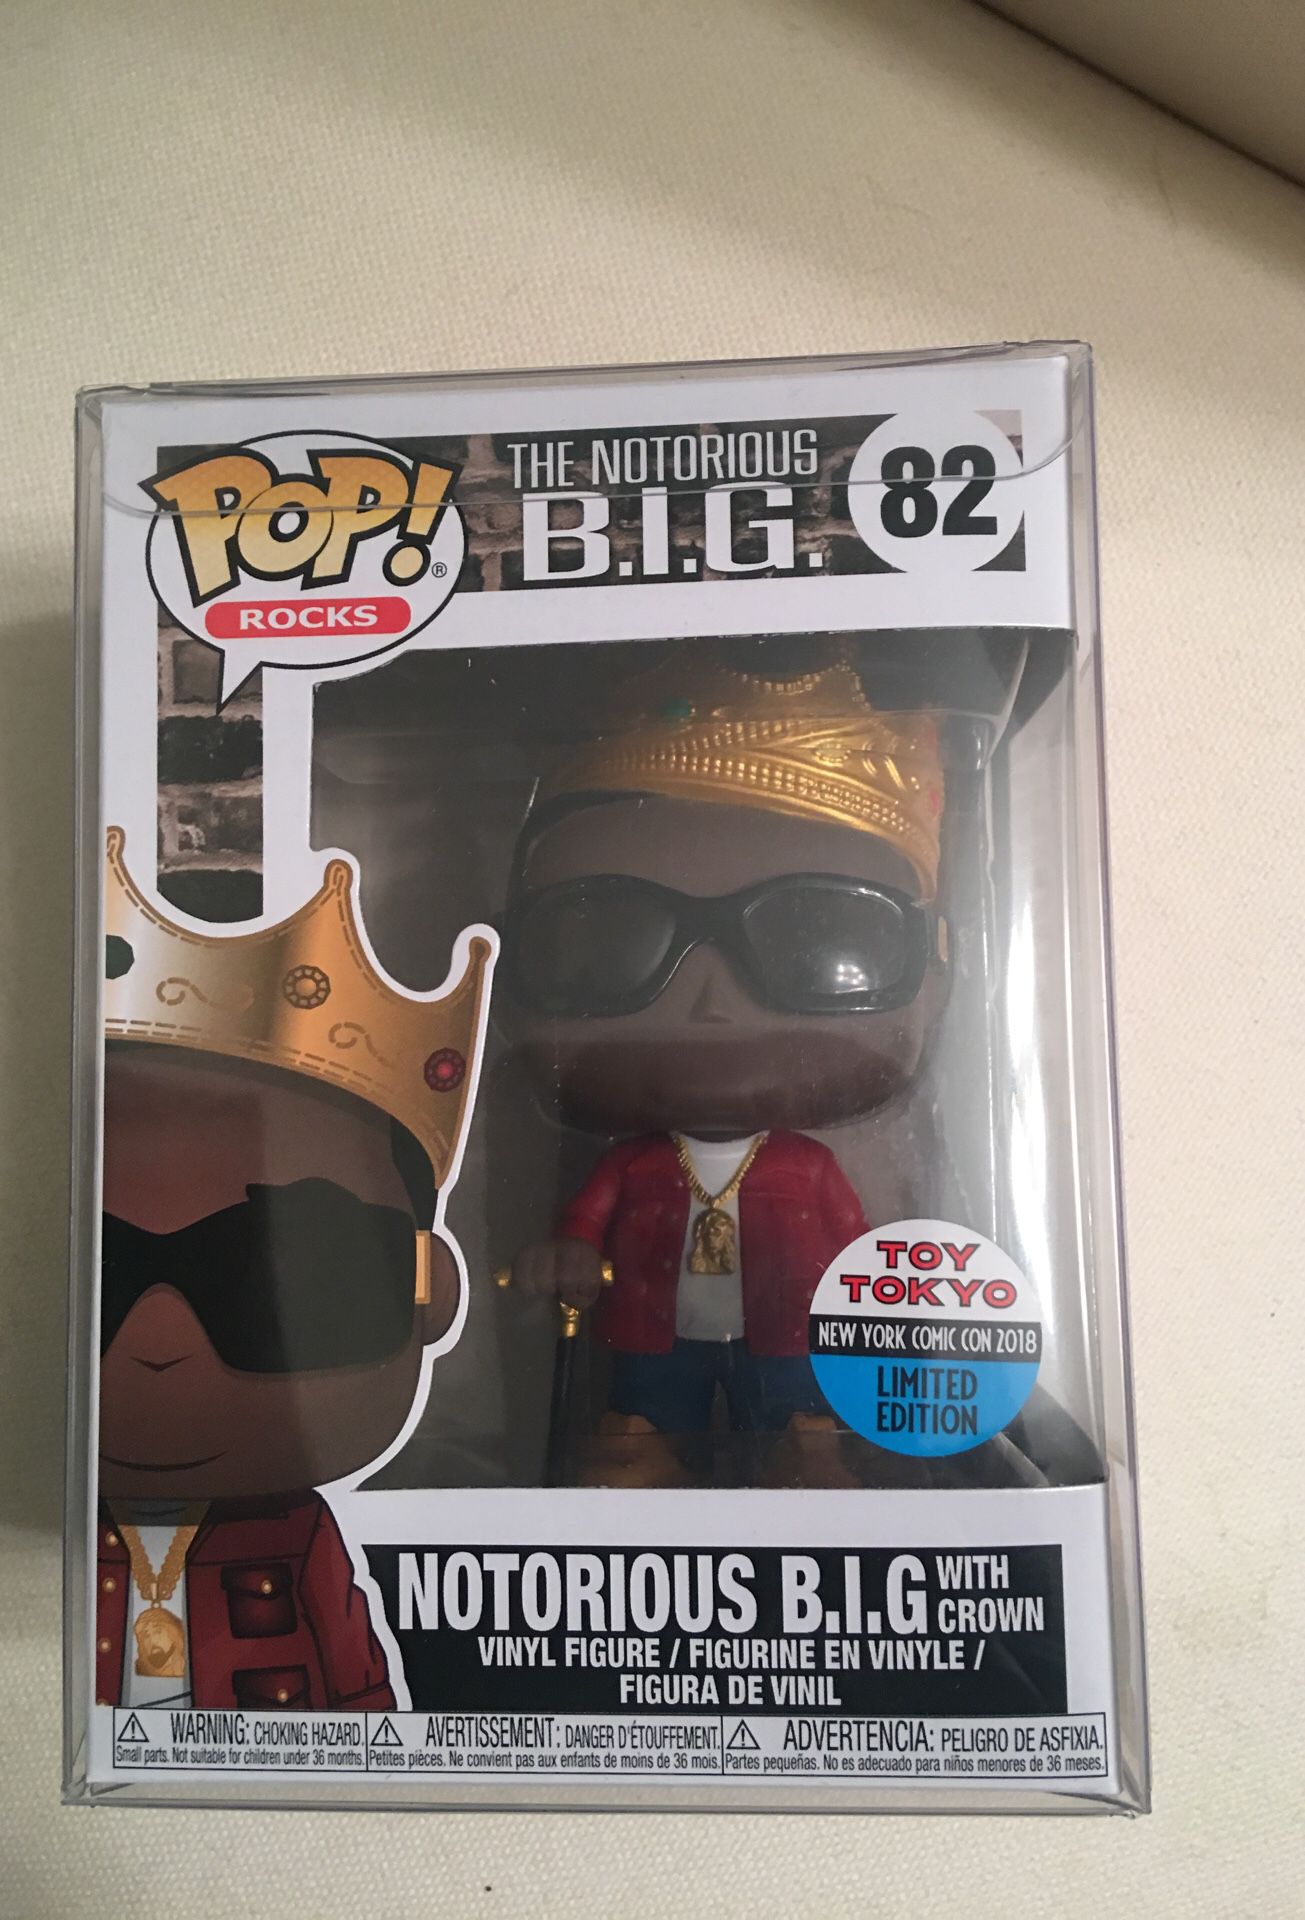 The Notorious B.I.G with crown vinyl figure. Funko pop 82. Toy Tokyo New York comic con 2018 LIMITED EDITION